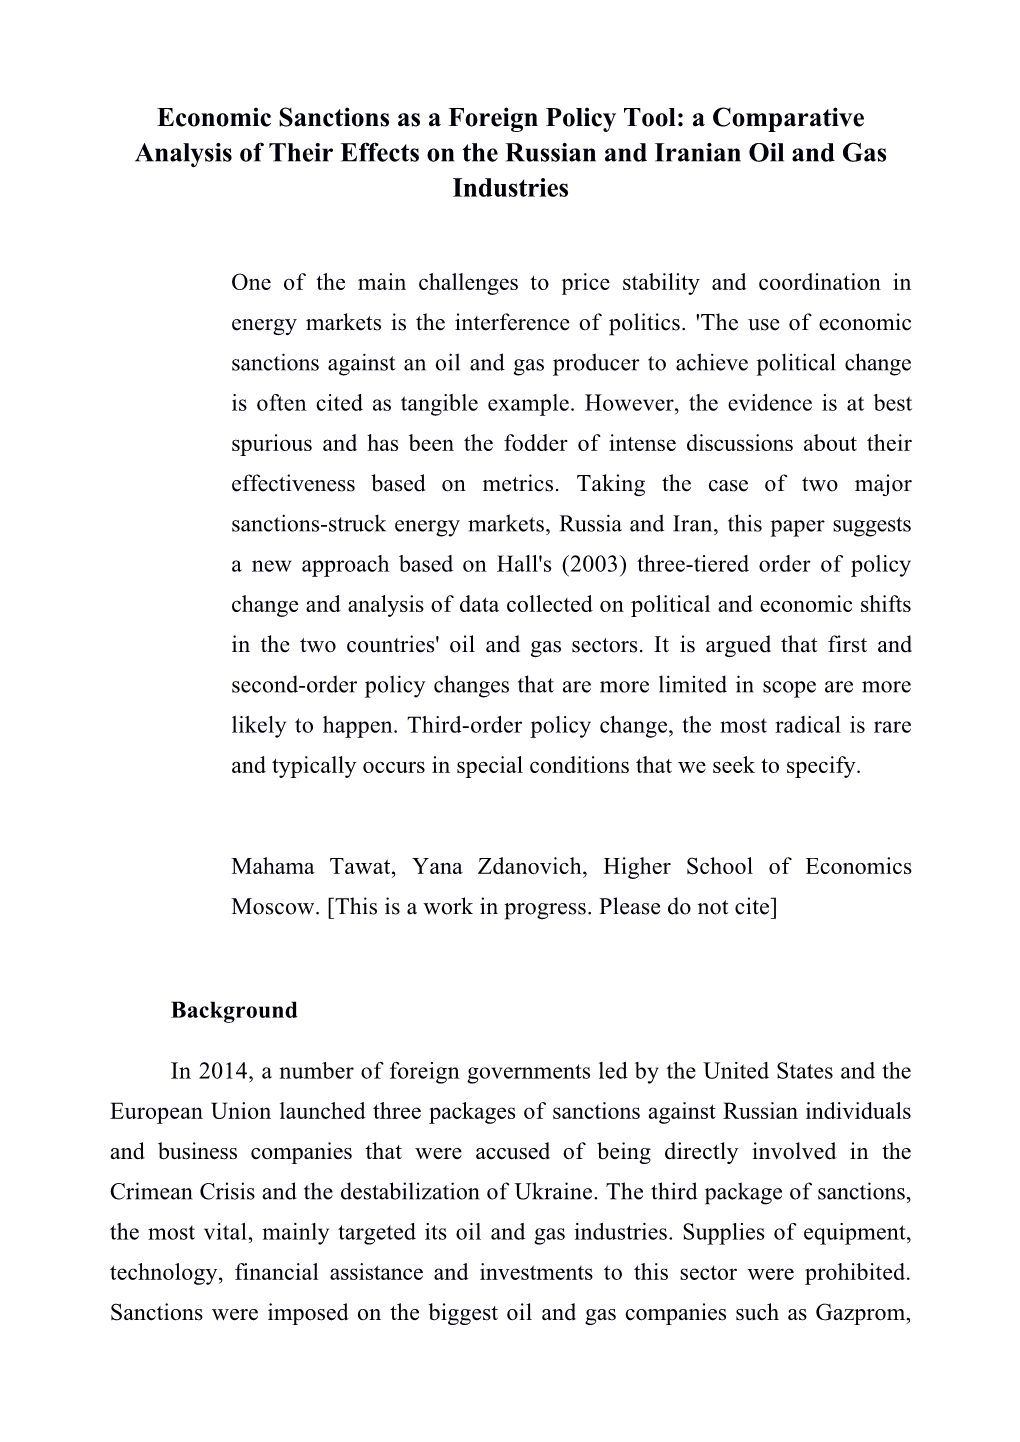 Economic Sanctions As a Foreign Policy Tool: a Comparative Analysis of Their Effects on the Russian and Iranian Oil and Gas Industries